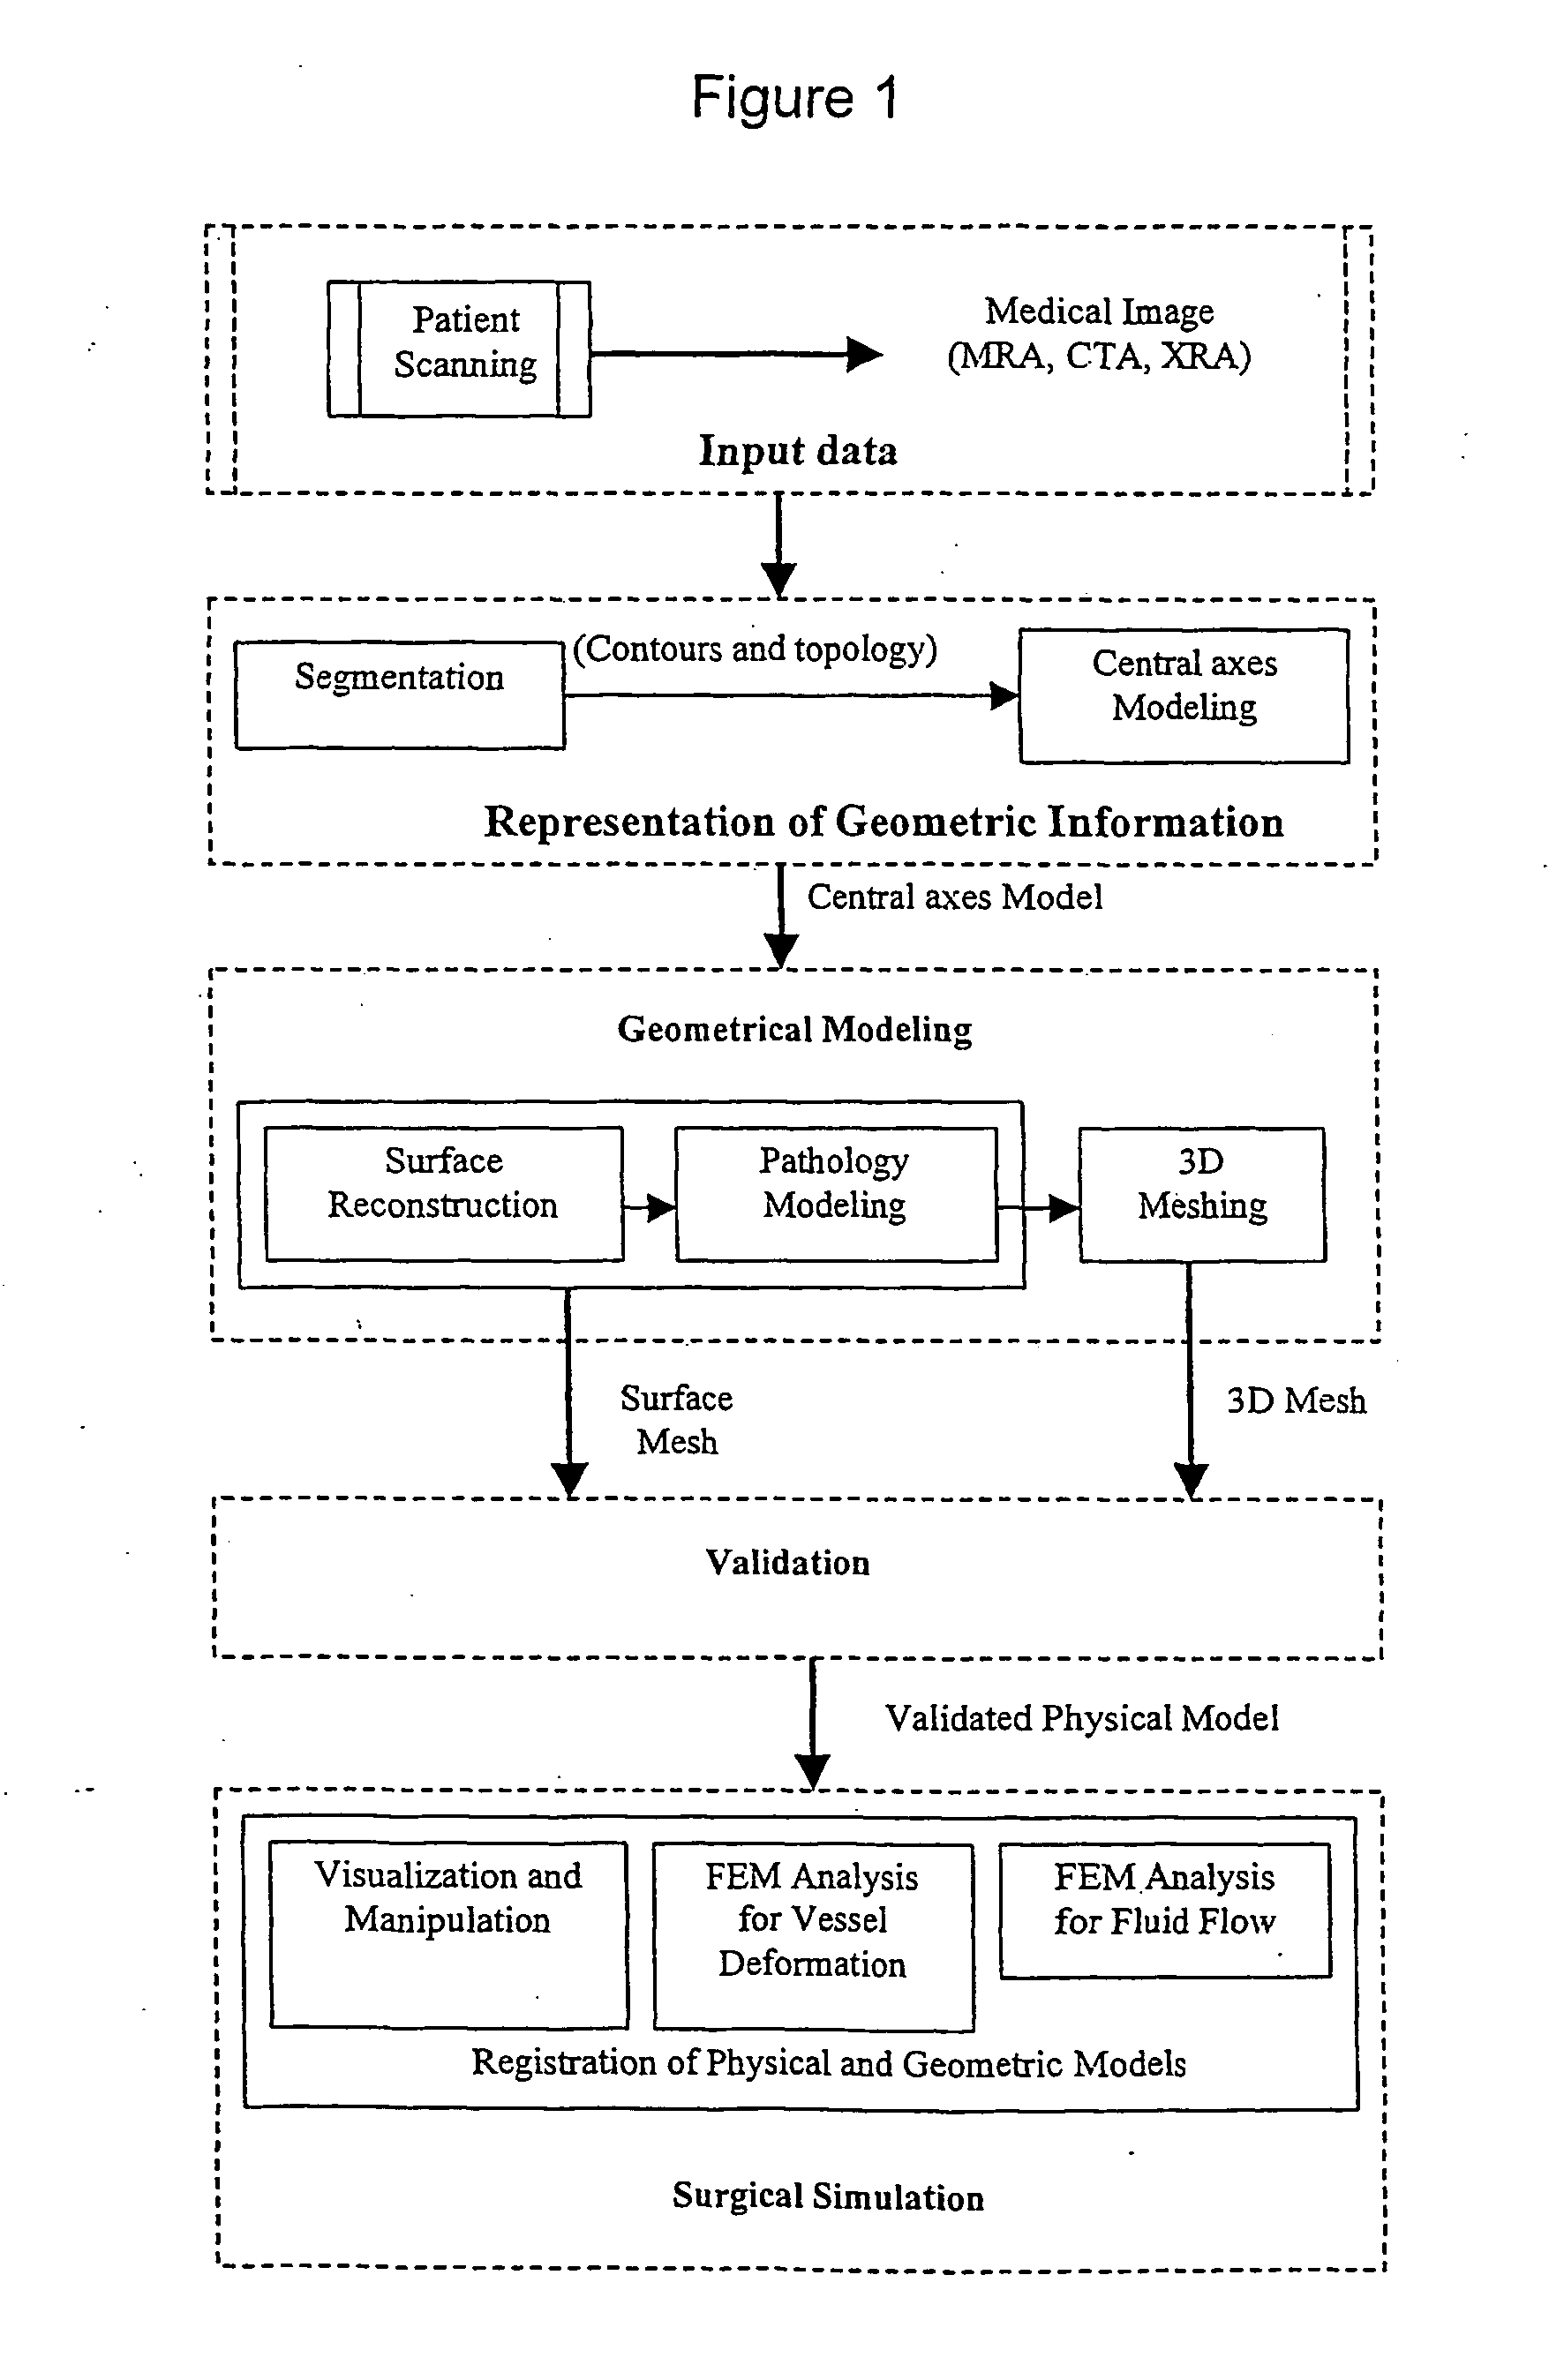 System and method of anatomical modeling